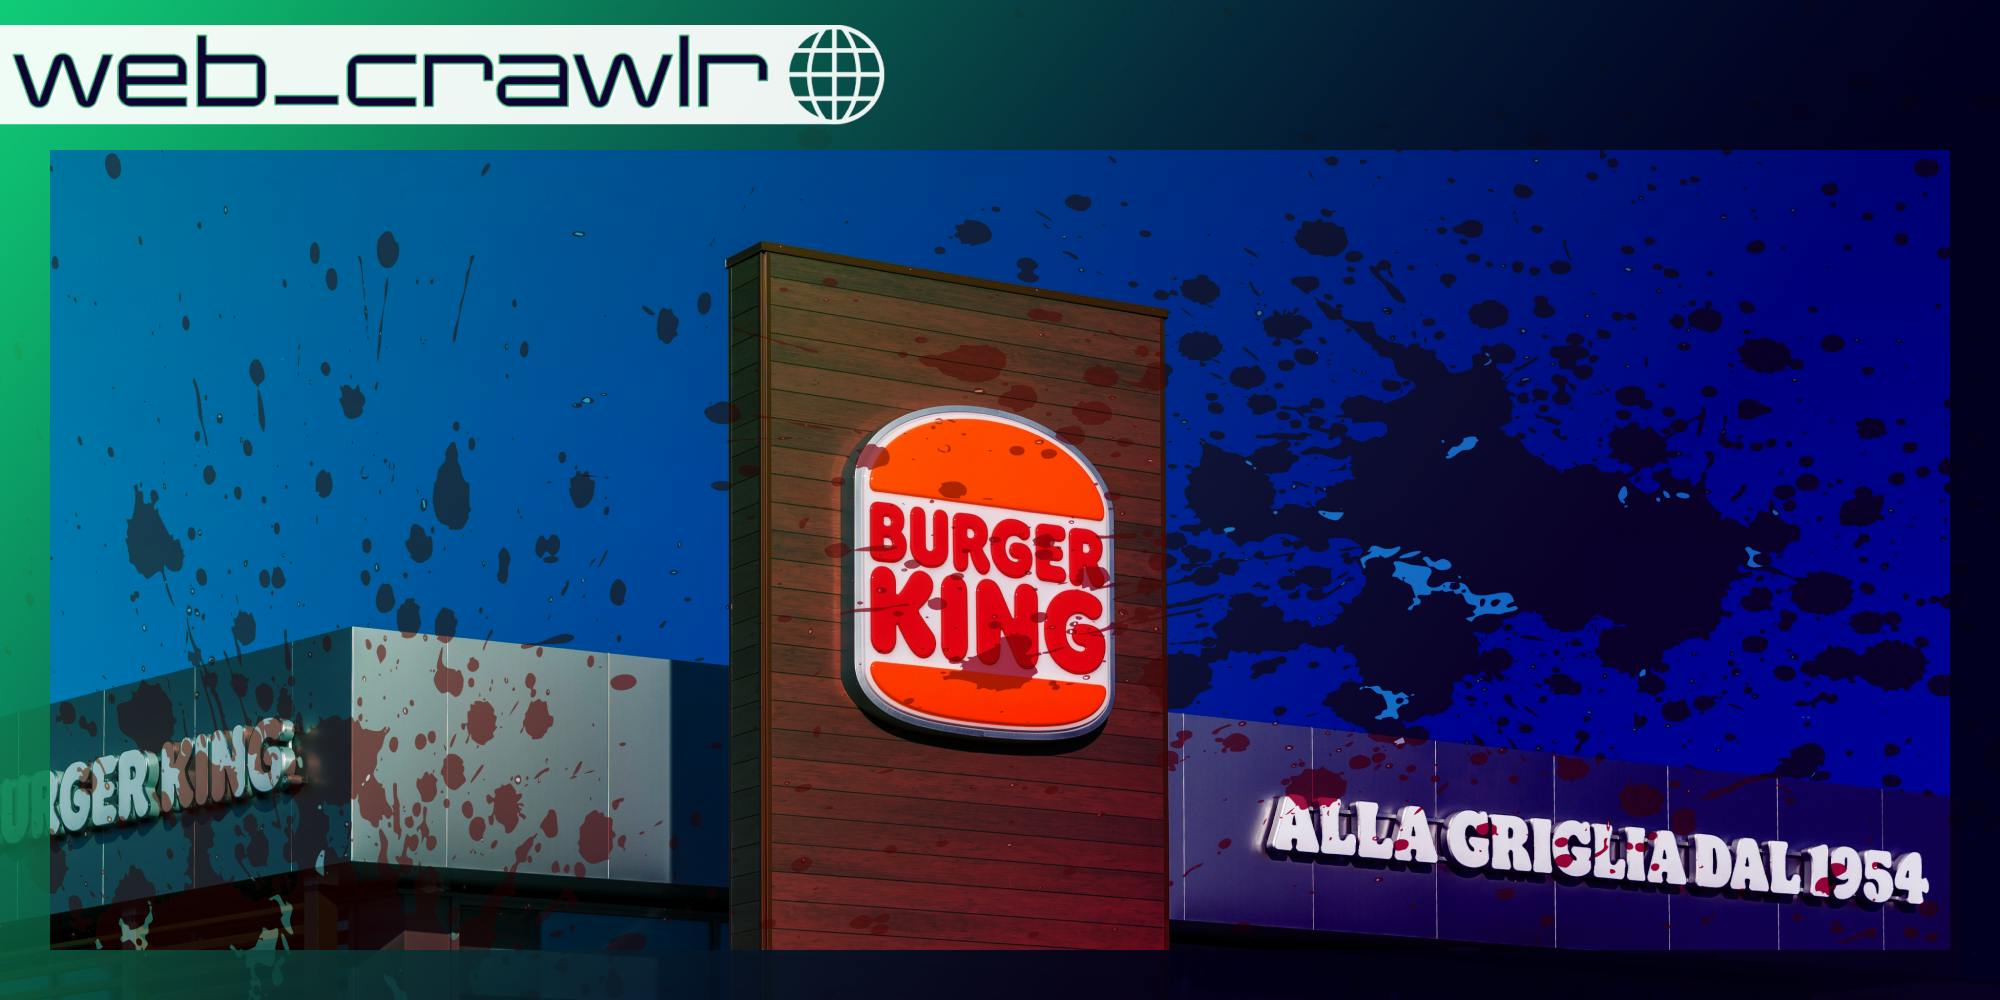 A Burger King store with blood droplets everywhere. The Daily Dot newsletter web_crawlr logo is in the top left corner.